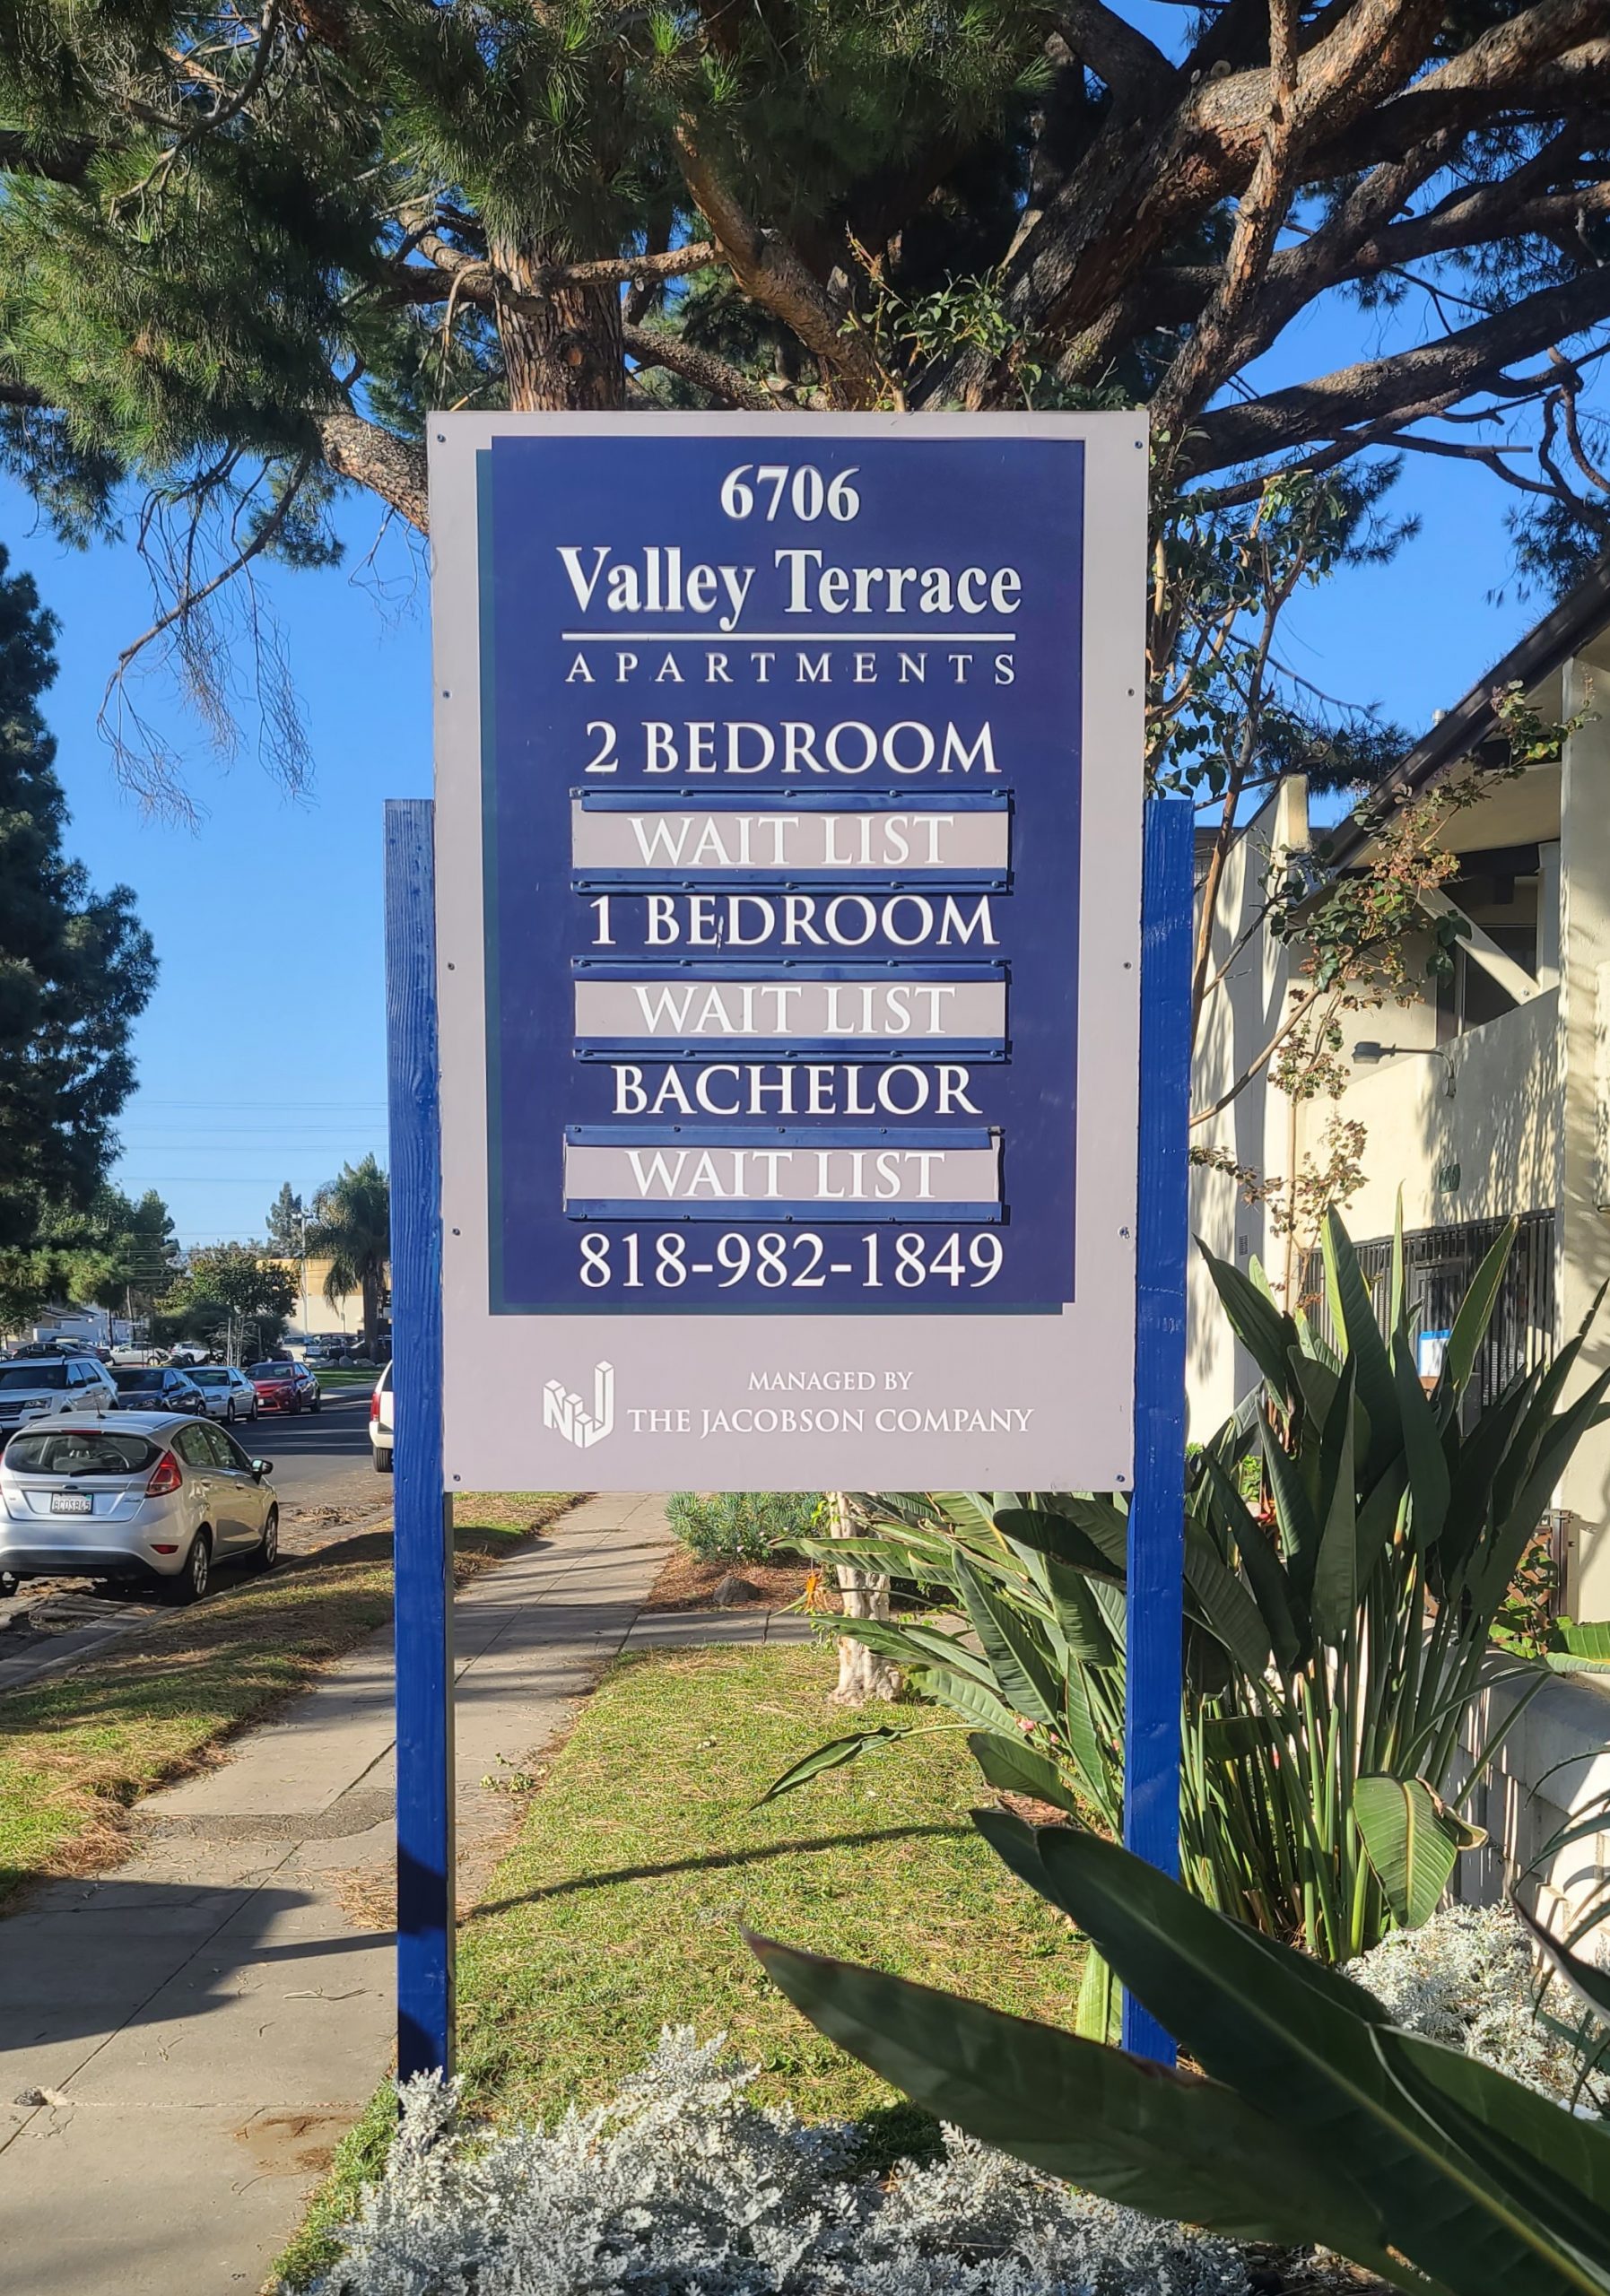 You are currently viewing Post and Panel Sign Reinstallation for The Jacobson Company in North Hollywood